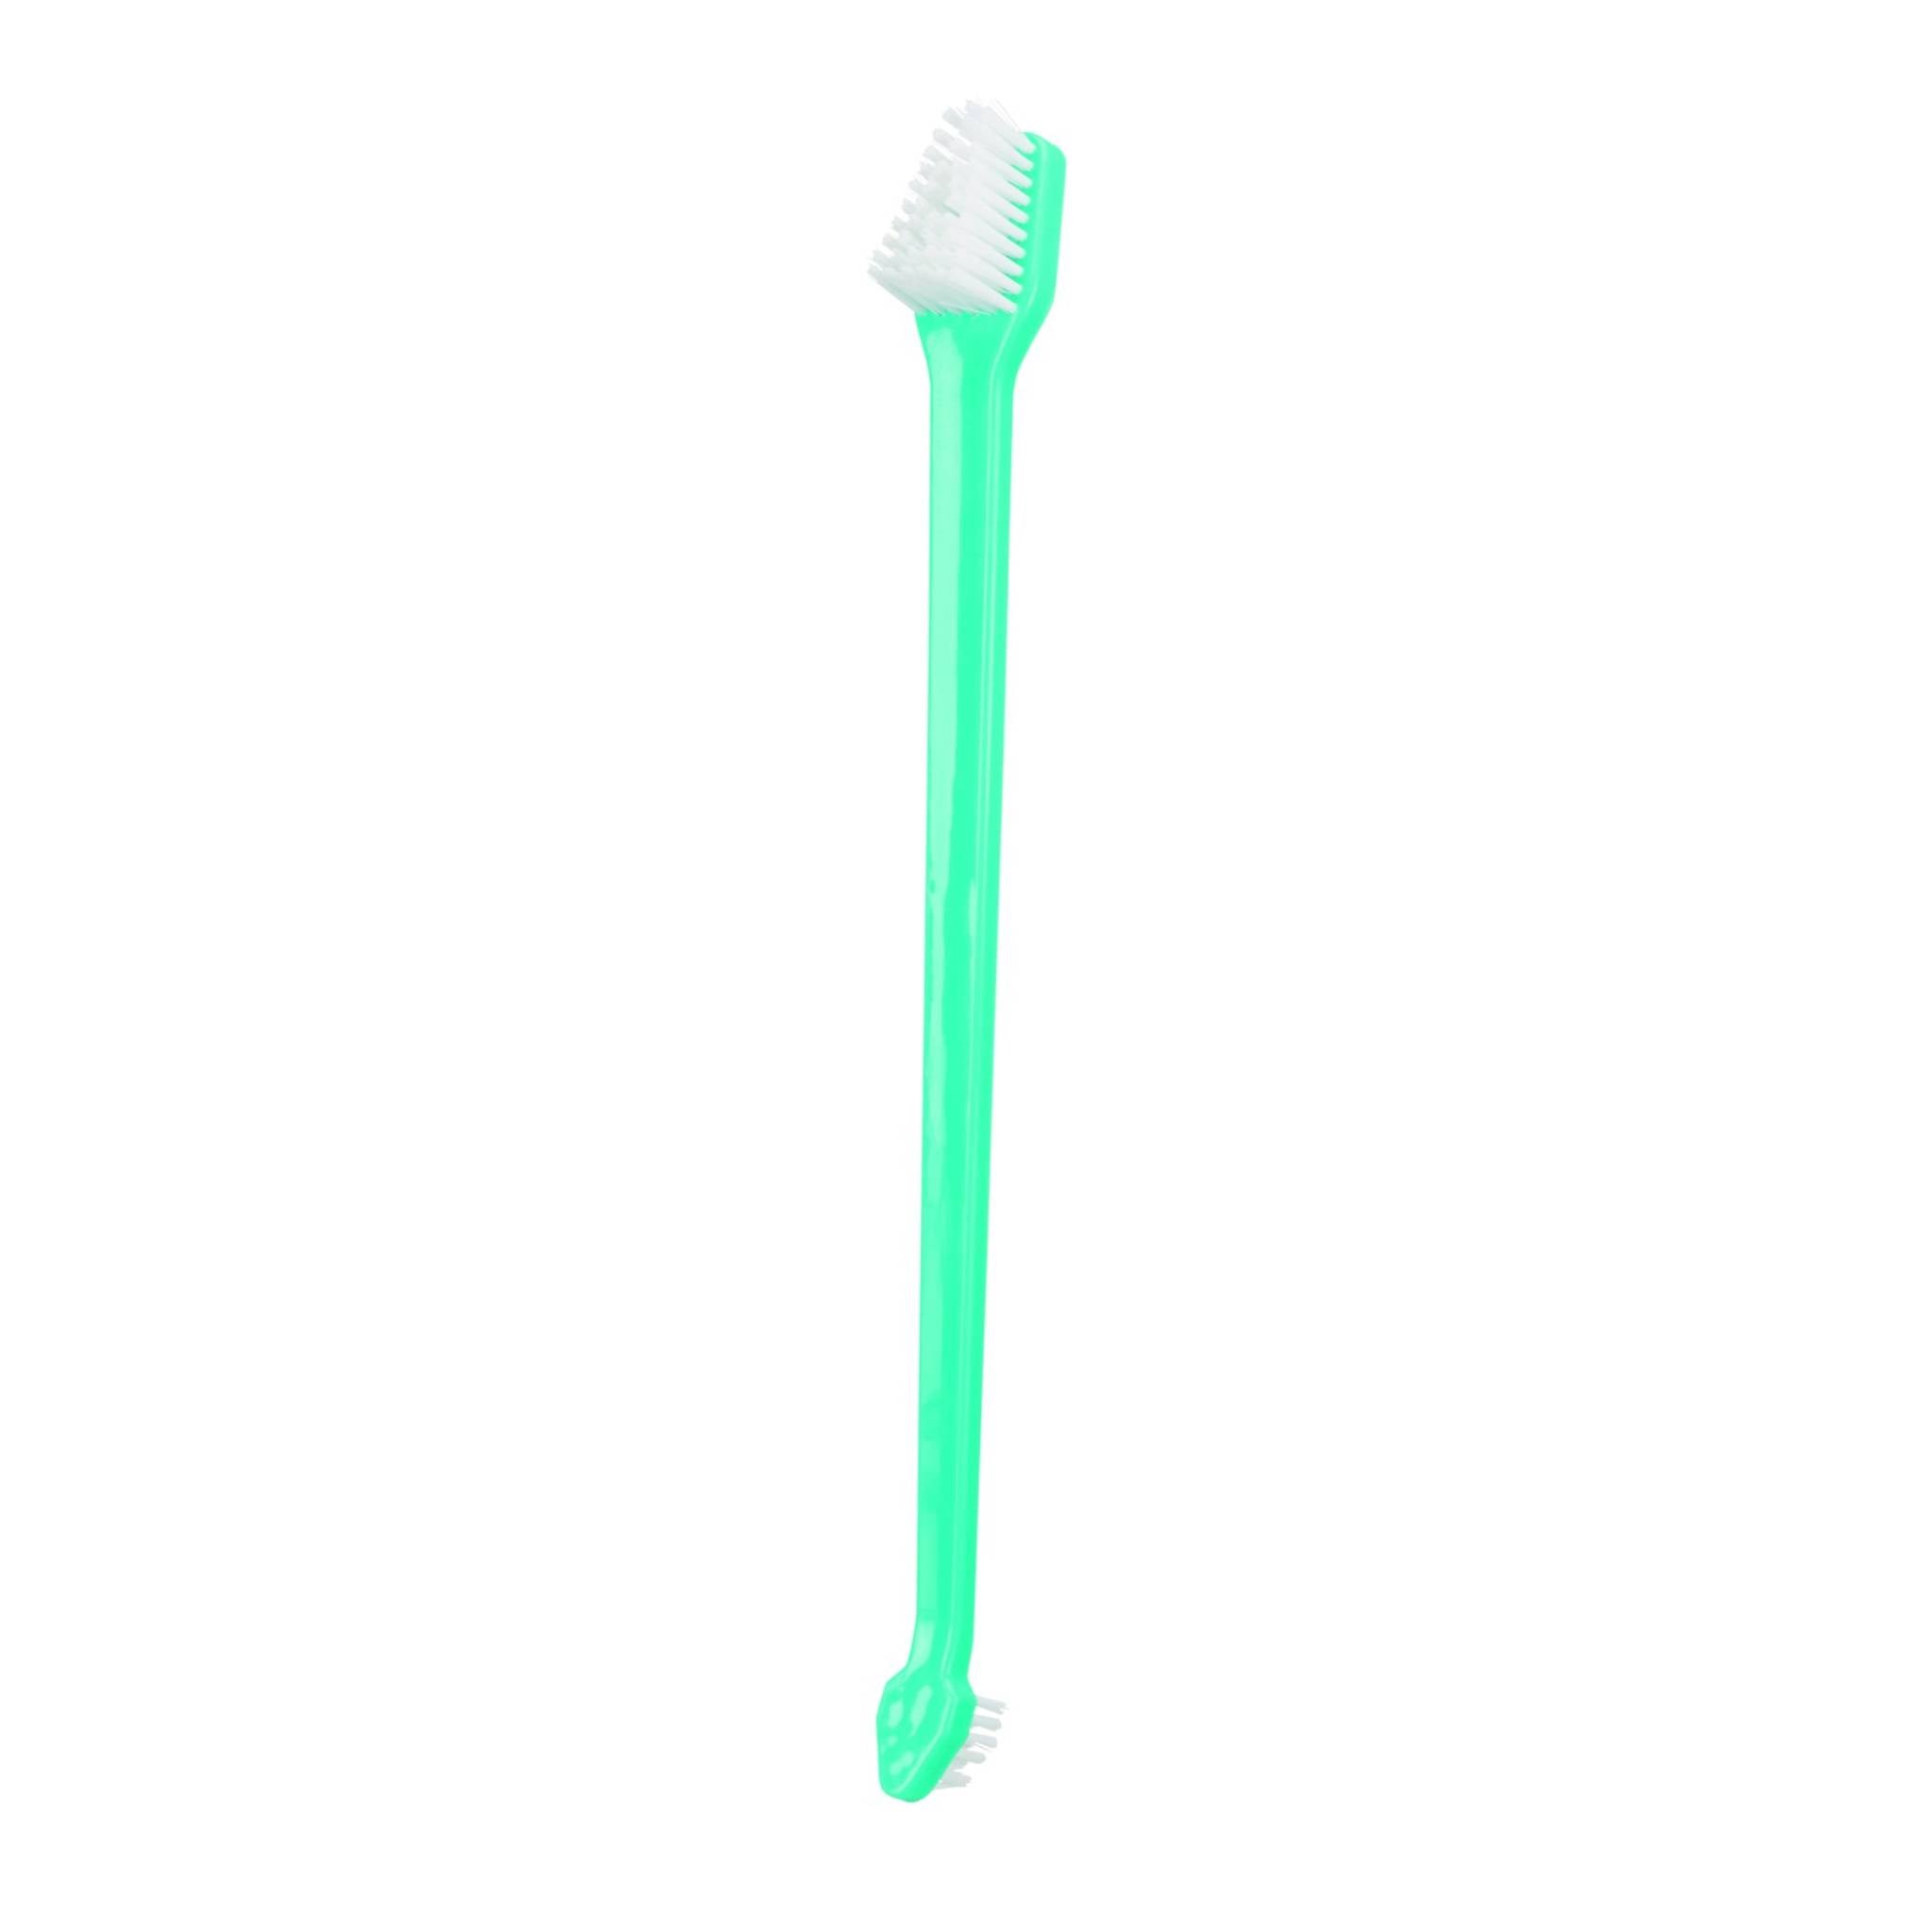 Trixie Toothbrush Set for Dogs/Cats - Pack of 2